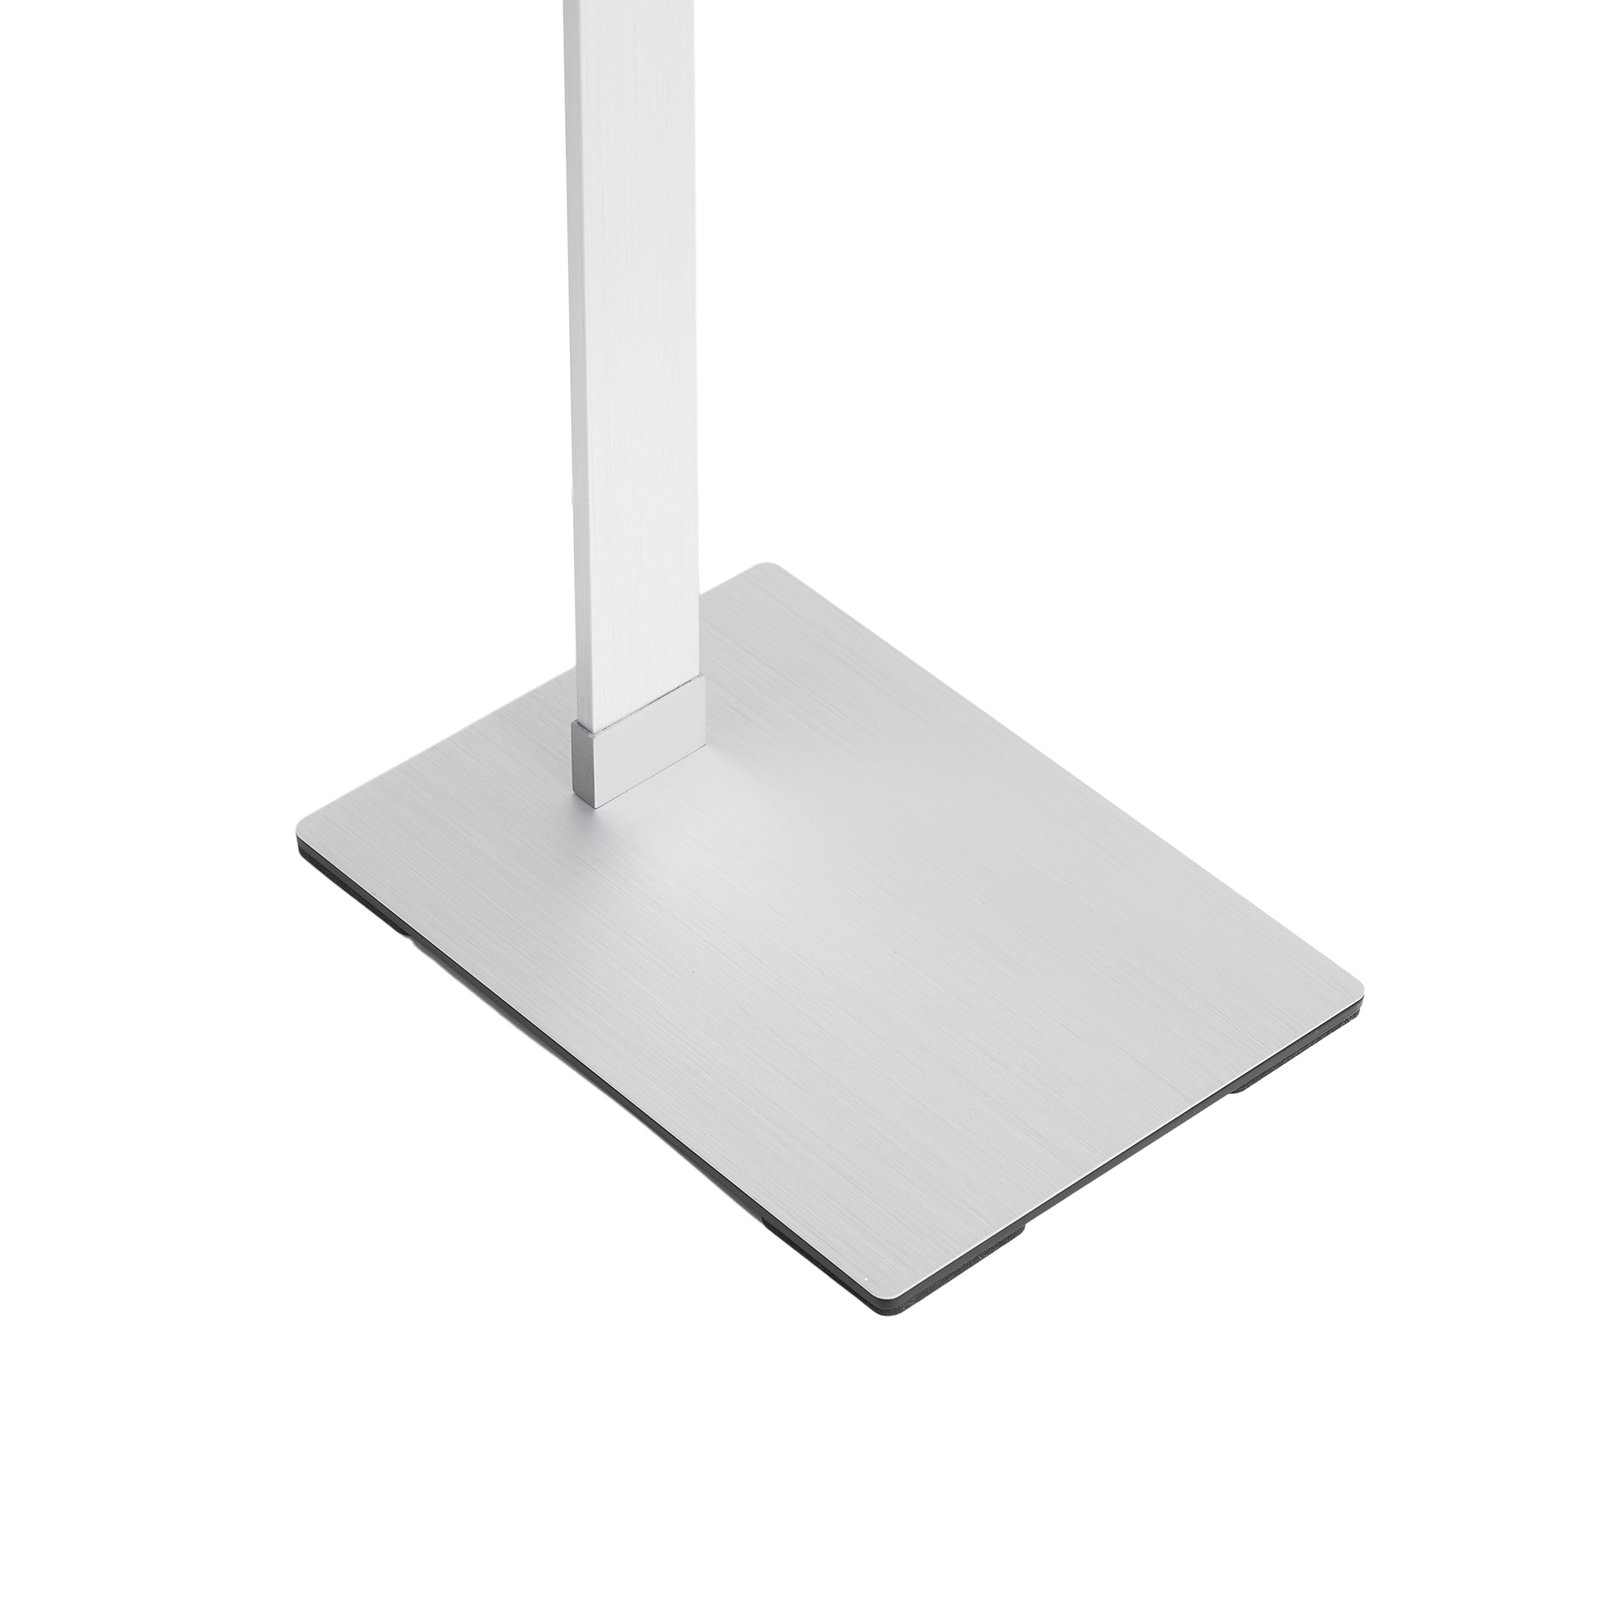 LED floor lamp Resi with dimmer, ideal for reading